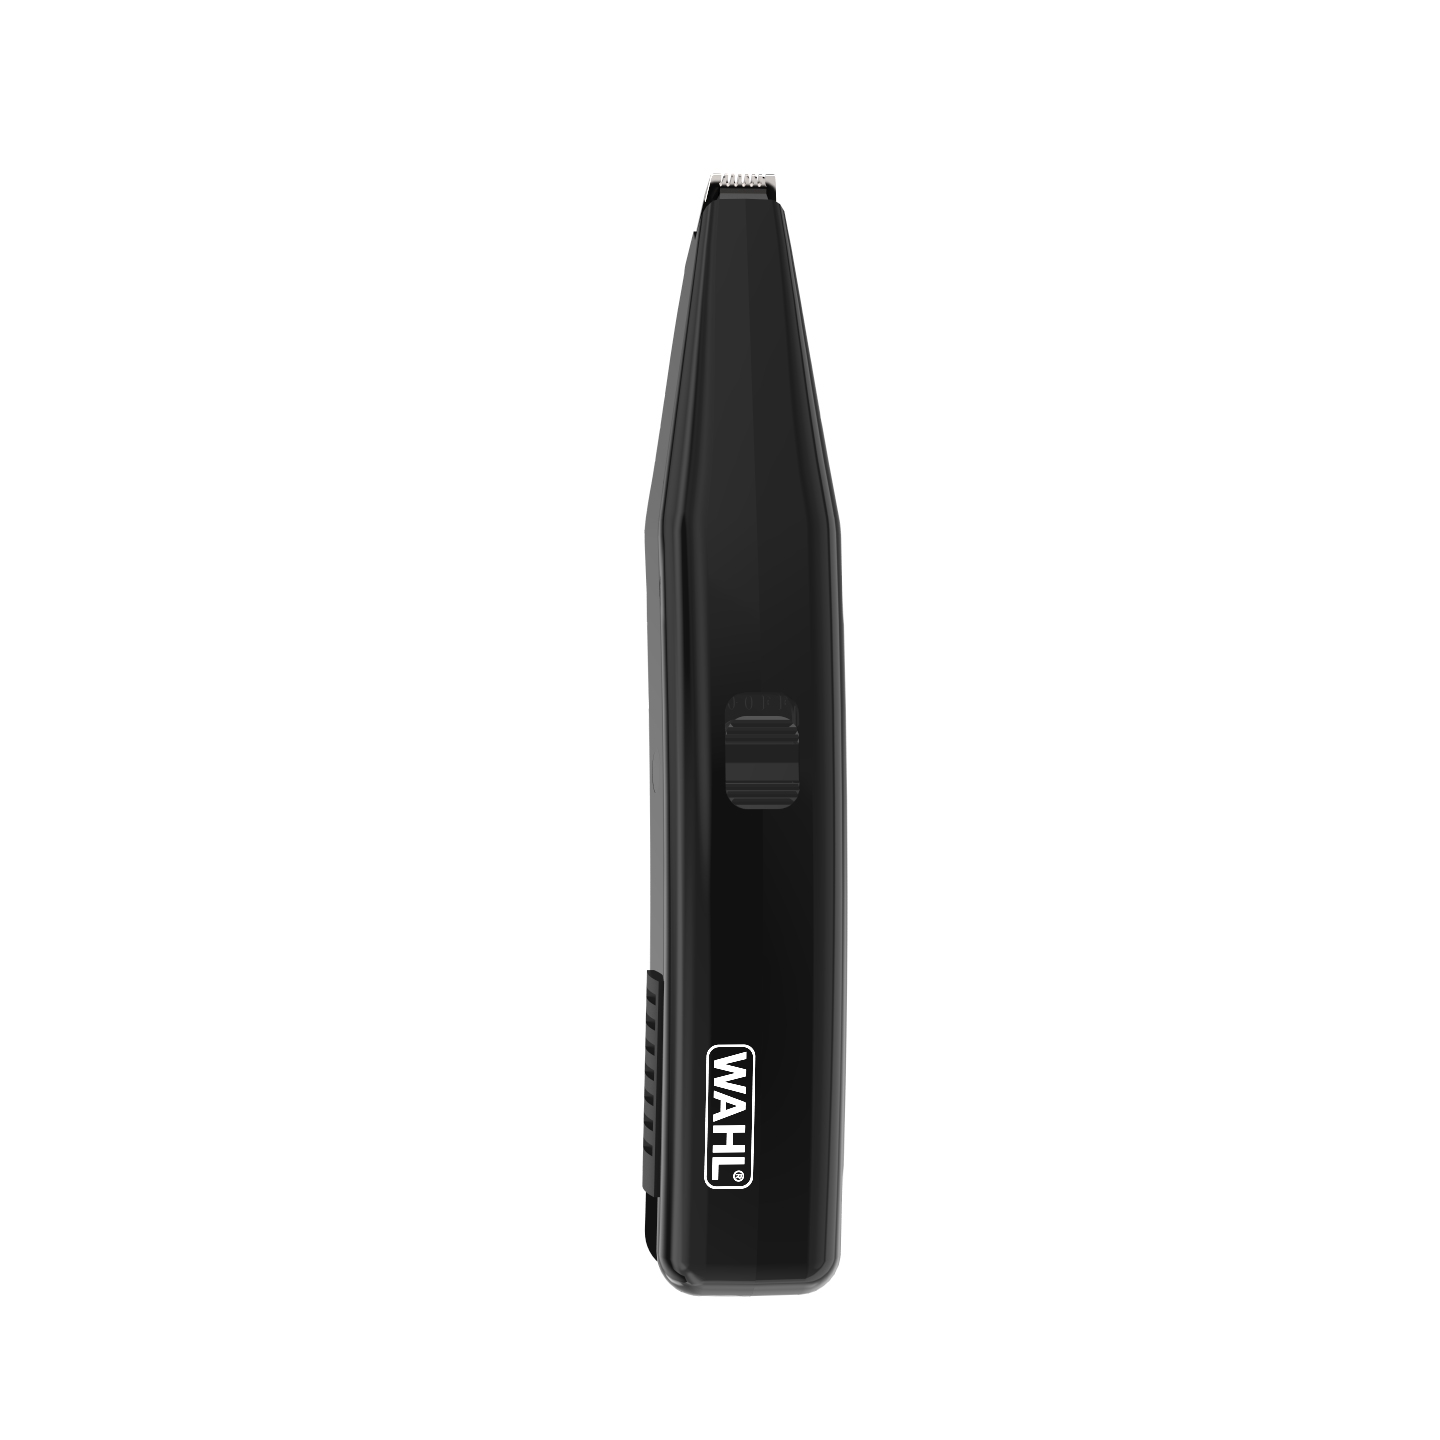 wahl paw trimmer